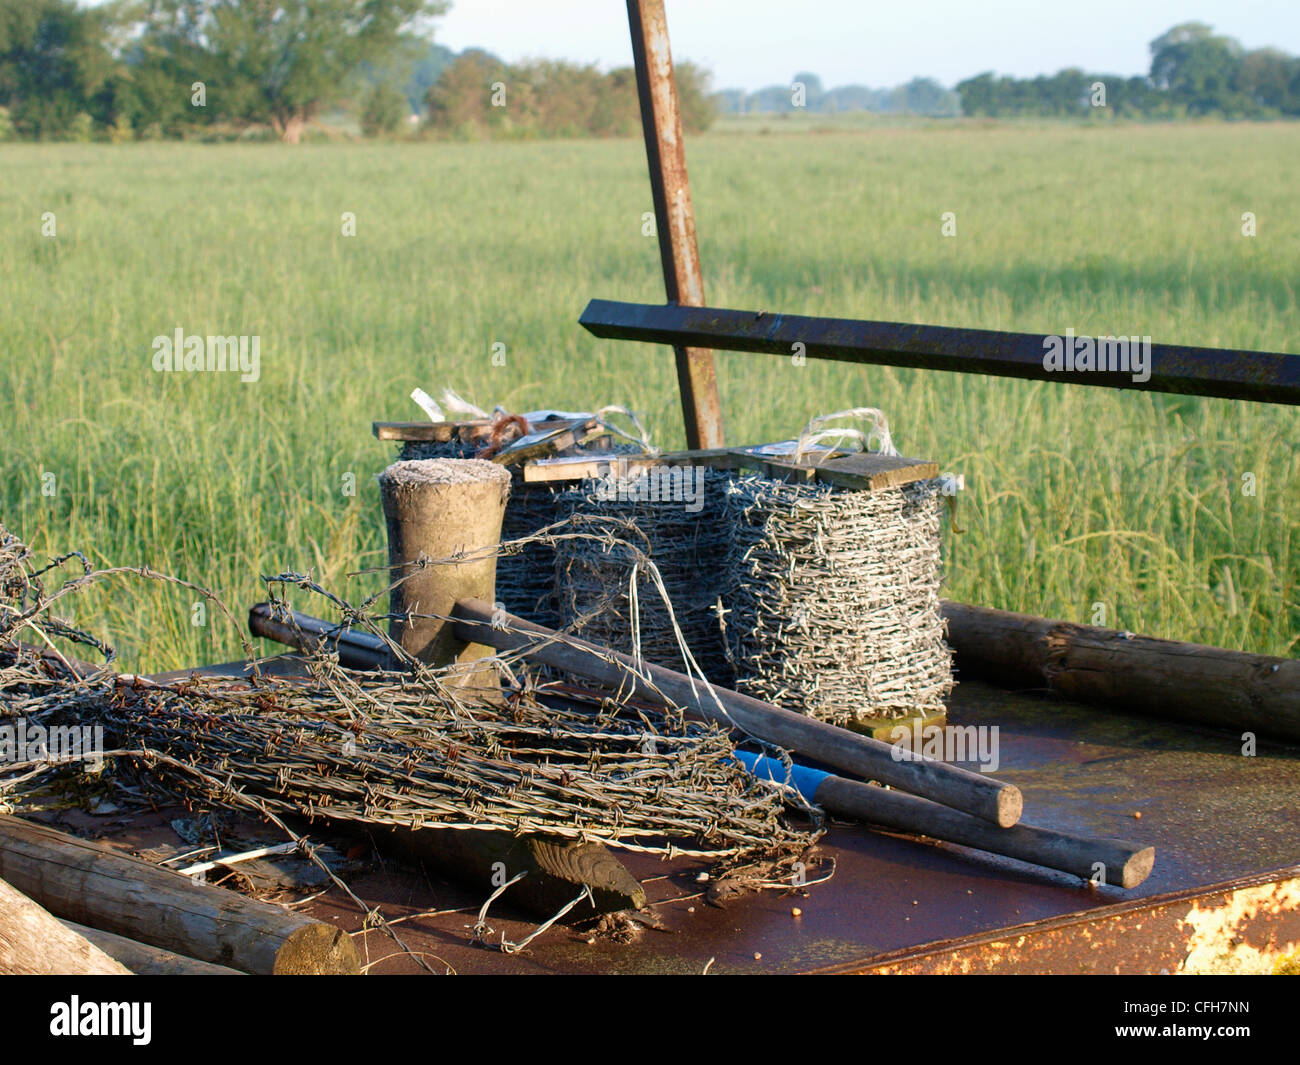 Barbed wire ready for fencing, UK Stock Photo